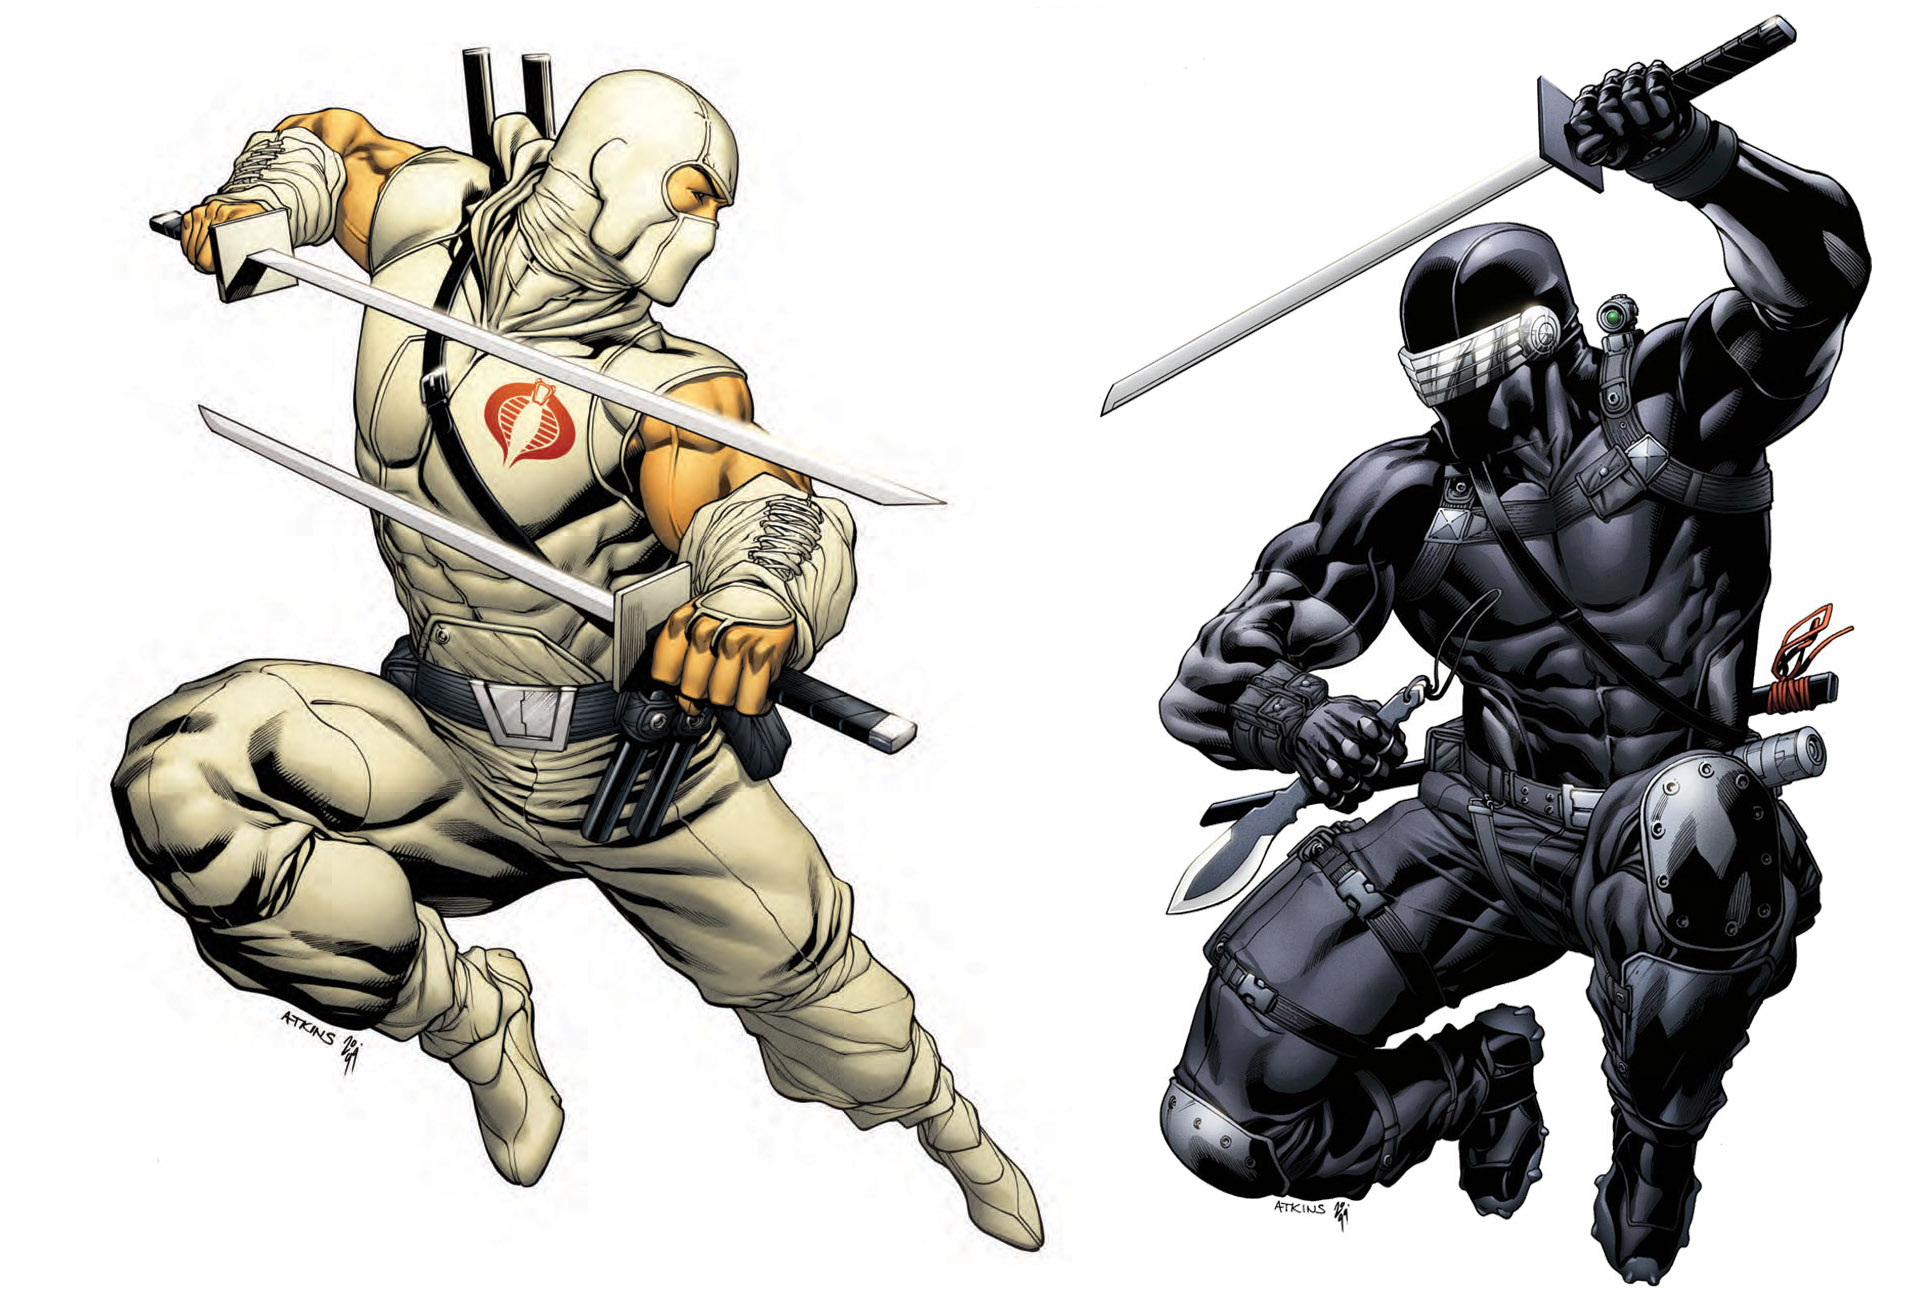 Snake Eyes and Storm Shadow what more could you want